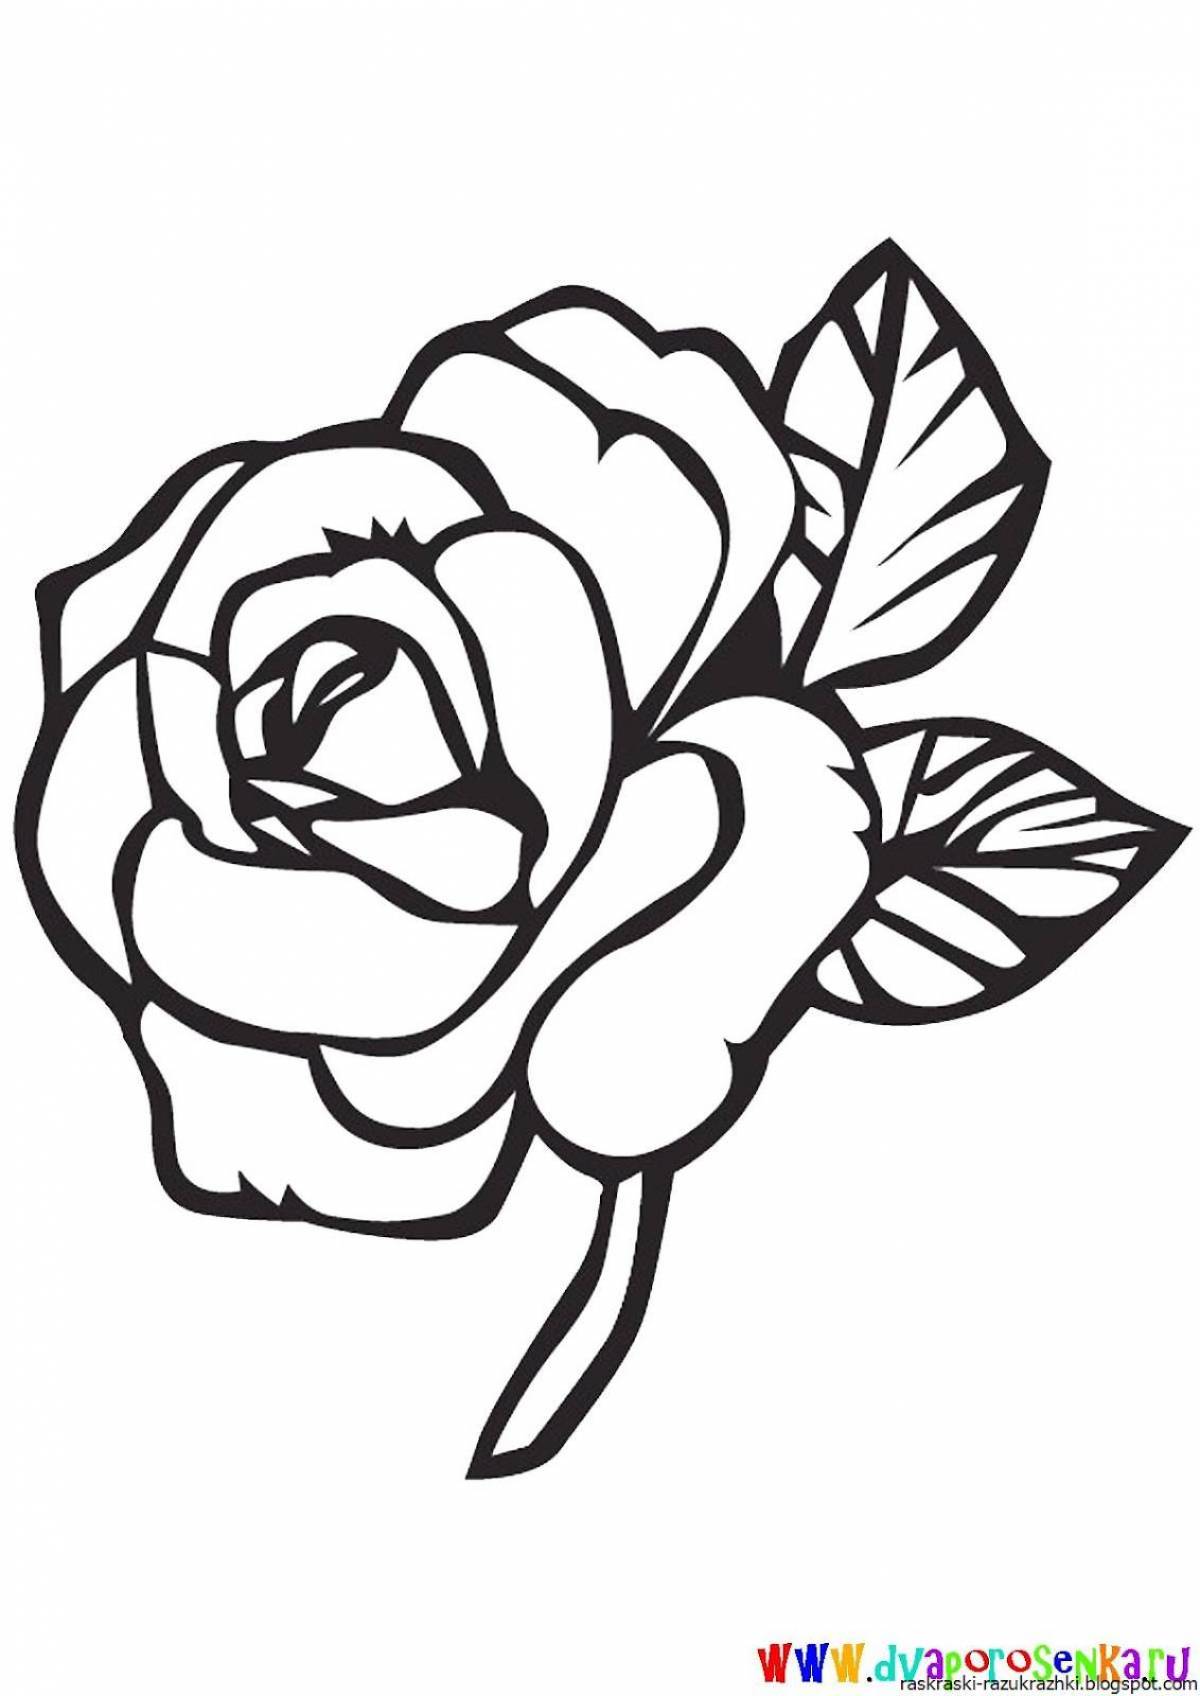 Amazing rose coloring book for kids